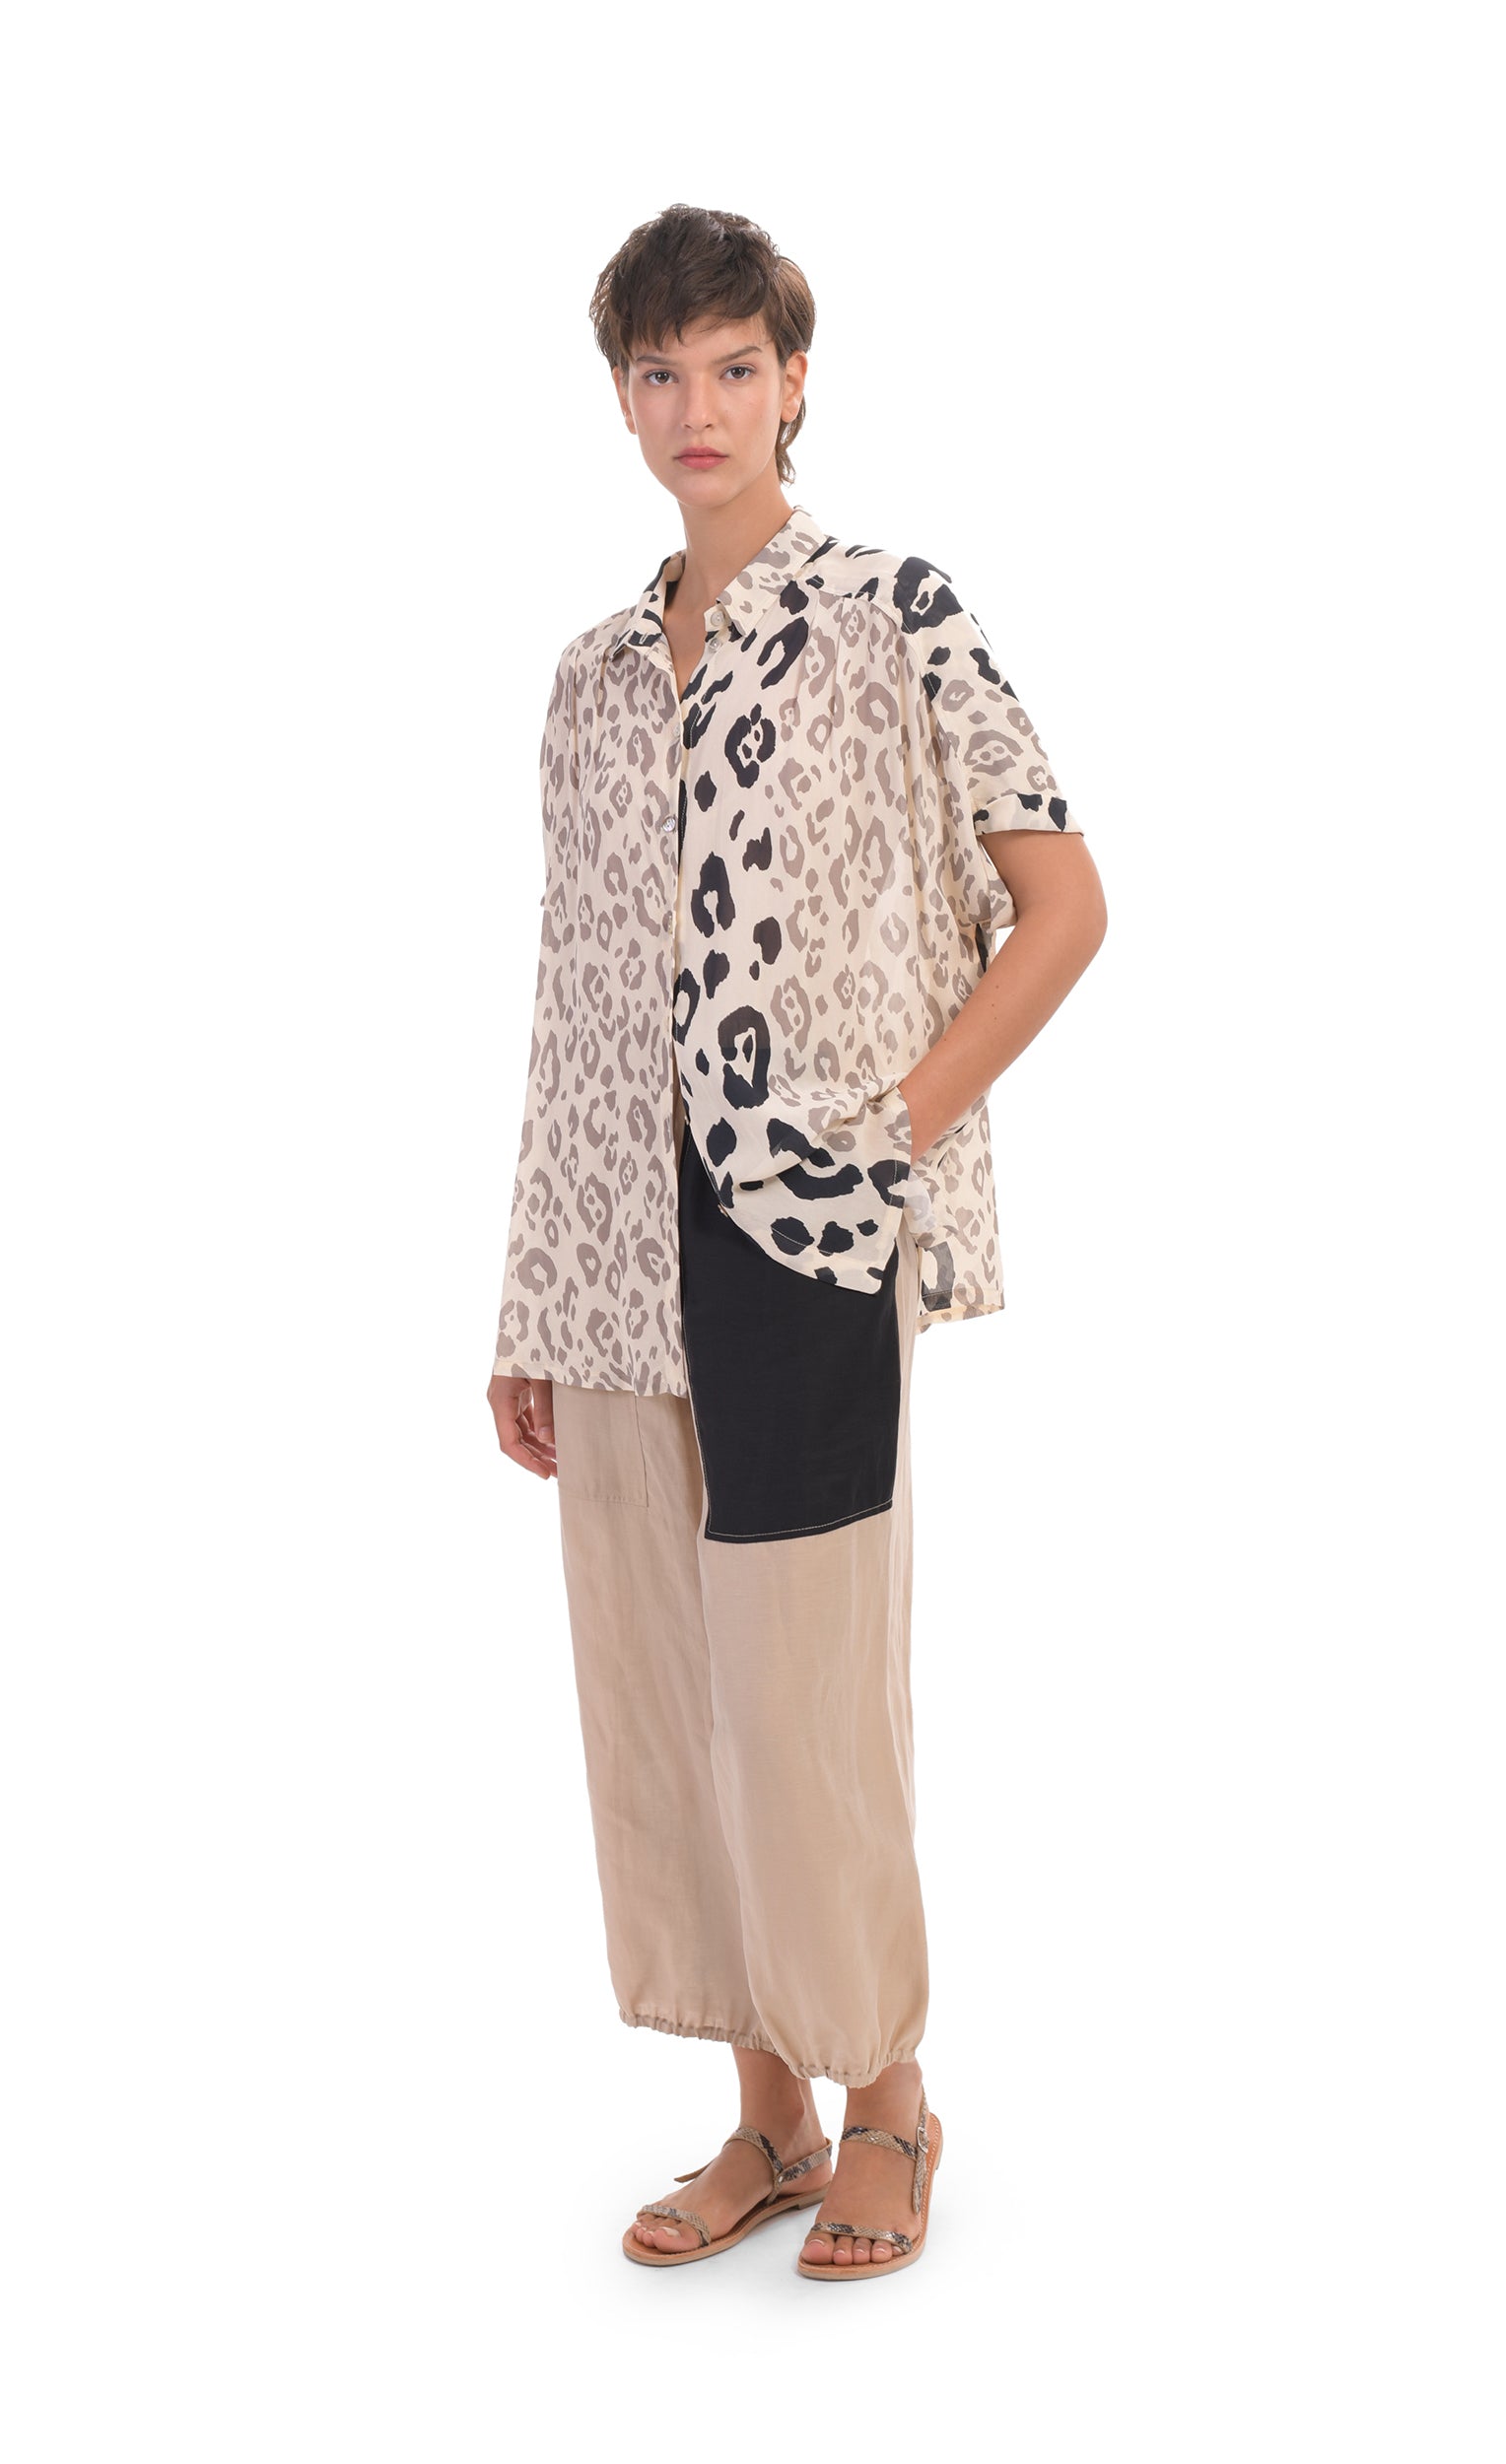 Front full body view of a woman wearing the alembika Cheetah Print Button Down Top. This top has different panels of black and taupe cheetah print on a creme background. The top has a button down front, short dolman sleeves, and a back pleat. on the bottom the woman is wearing cream pants with a black patch pocket.